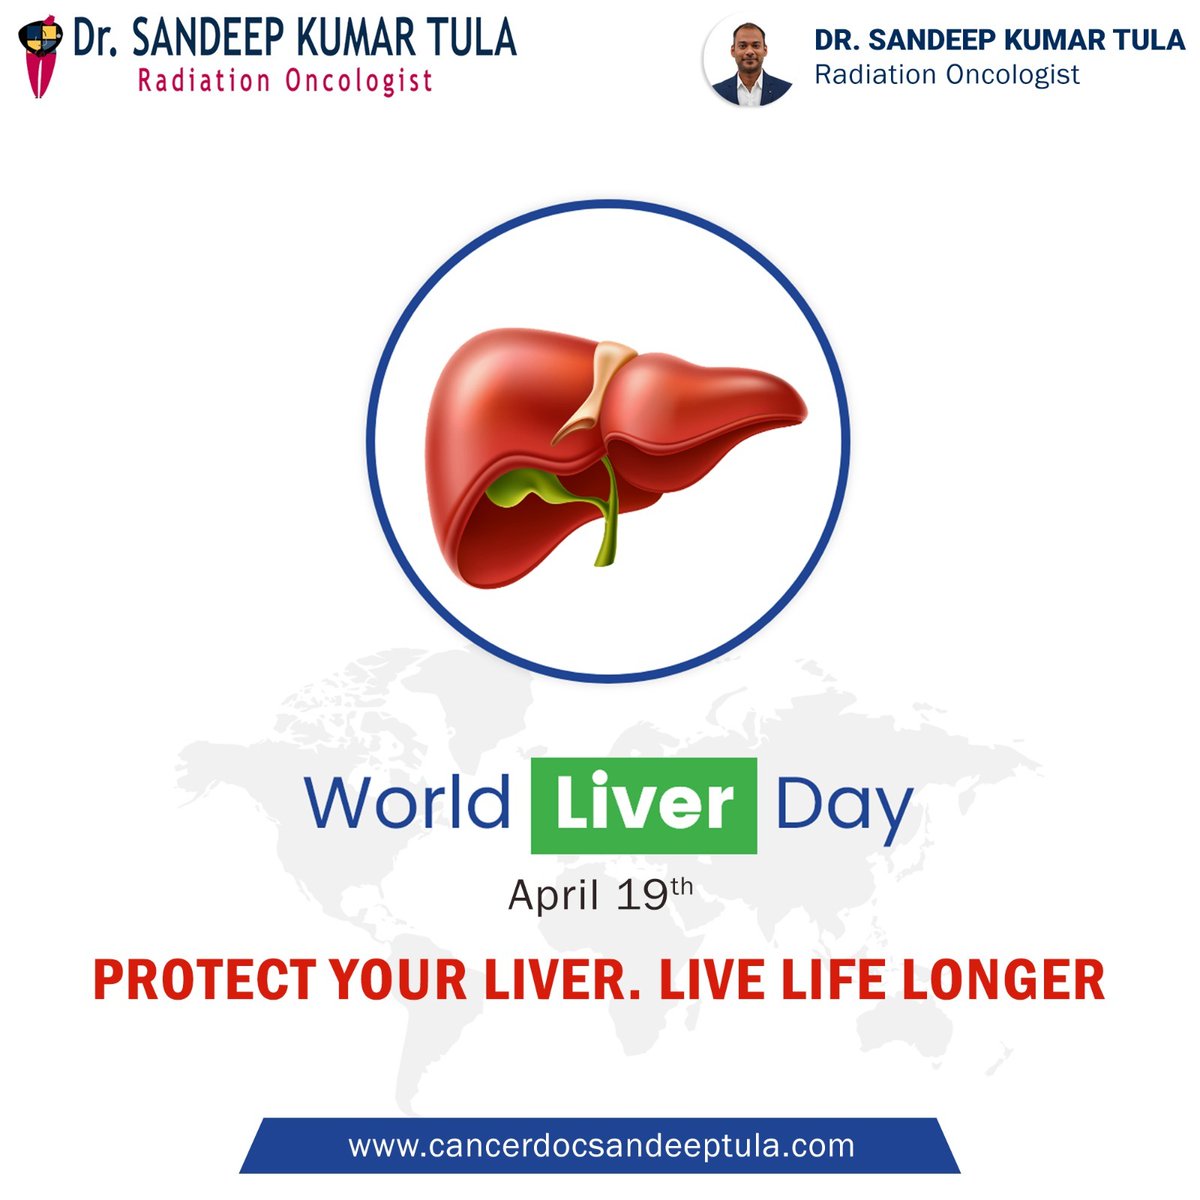 A healthy liver leads to a happier life. 
Let's raise awareness and take action this World Liver Day.

#WorldLiverDay #LiverHealth #HealthyLiver #LoveYourLiver #LiverAwareness #LiverCare #LiverWellness #KeepYourLiverStrong #LiverAware 

cancerdocsandeeptula.com